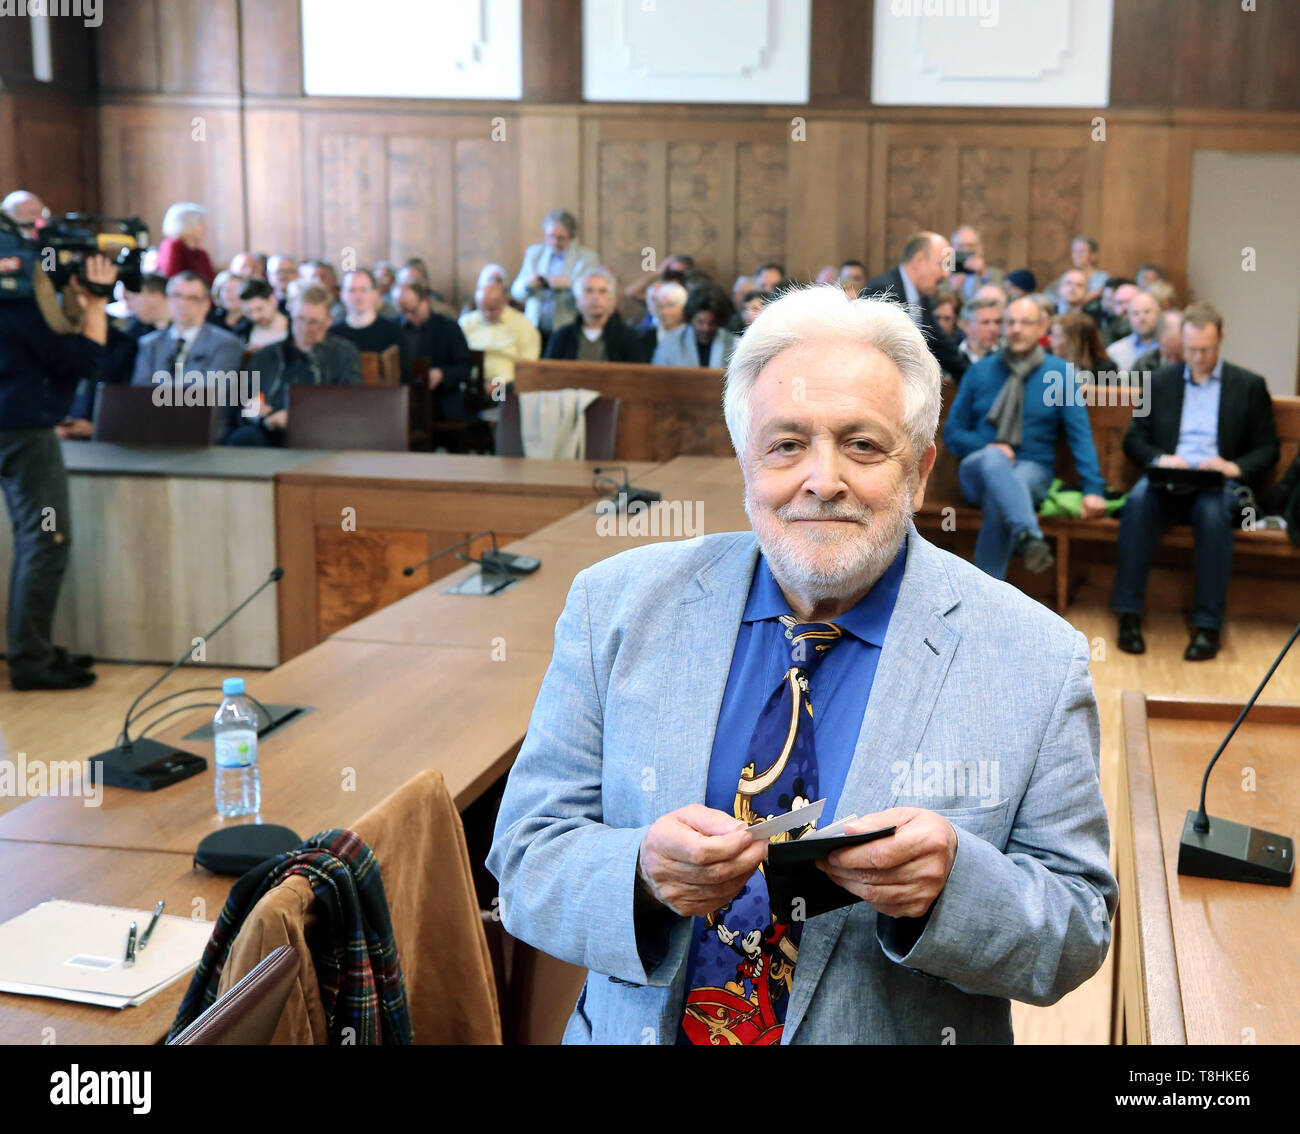 Duisburg, Germany. 13th May, 2019. The publicist Henryk M. Broder, accused of insulting, waits in the crowded courtroom for the trial to begin. In September 2016, at the request of the weekly newspaper 'Junge Freiheit', Broder had said about the Islamic scholar Kaddor that she had 'a gossip on her hands'. Broder appealed against an order of punishment, which is why the trial is now at trial. Credit: Roland Weihrauch/dpa/Alamy Live News Stock Photo